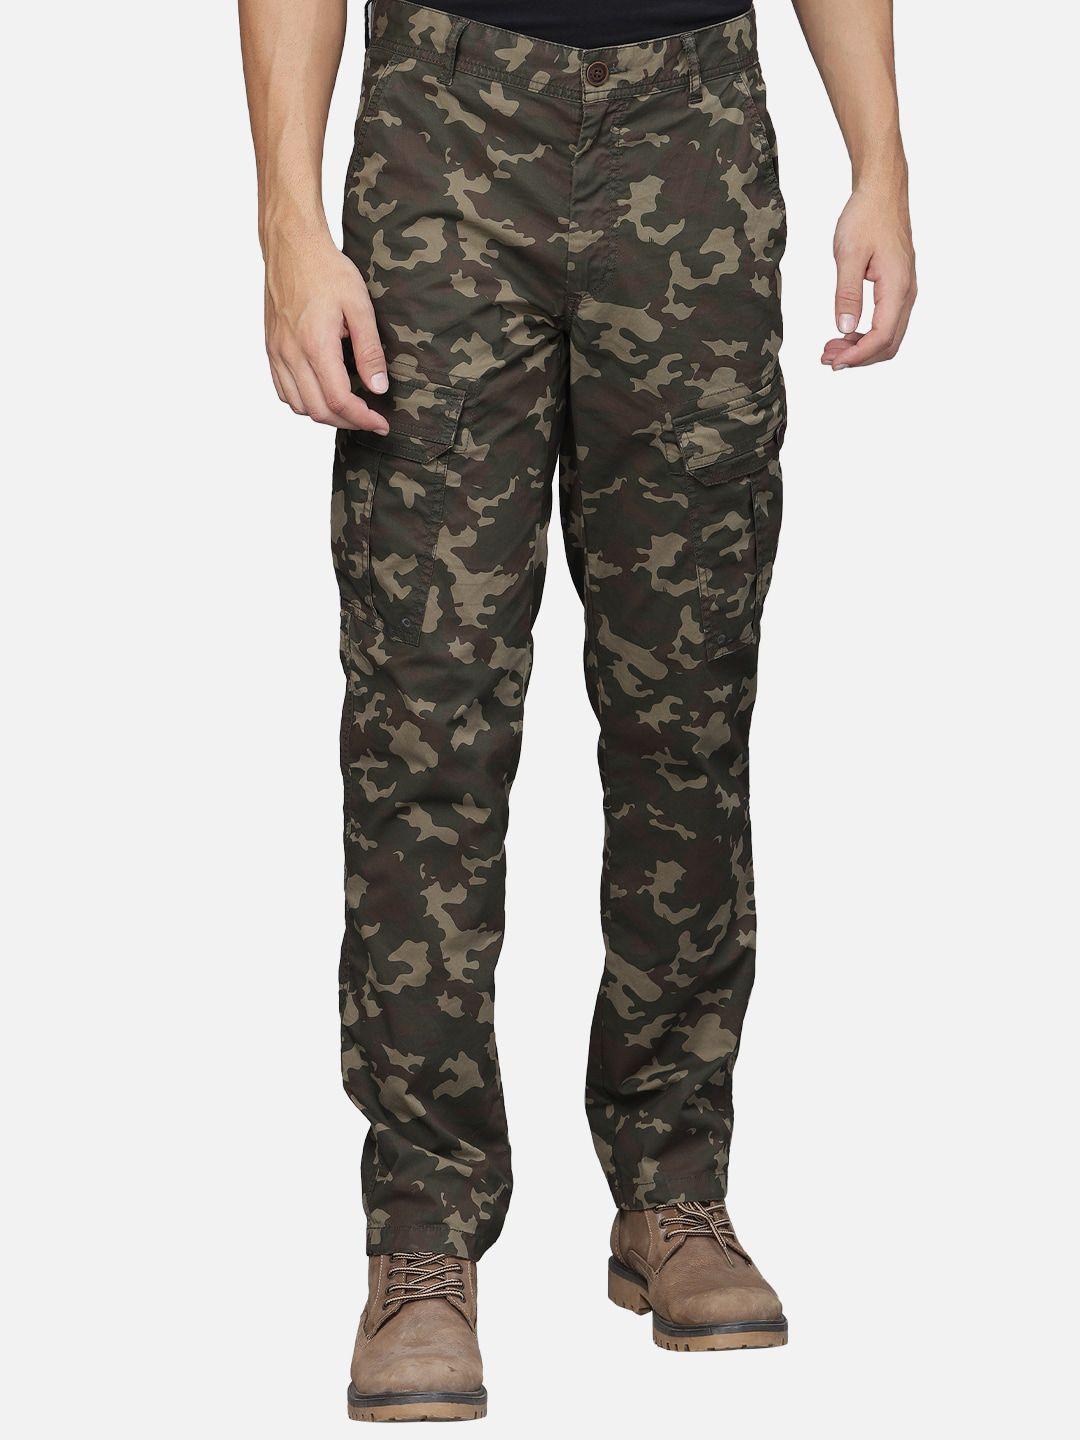 t-base-men-olive-green-camouflage-printed-cargos-trousers